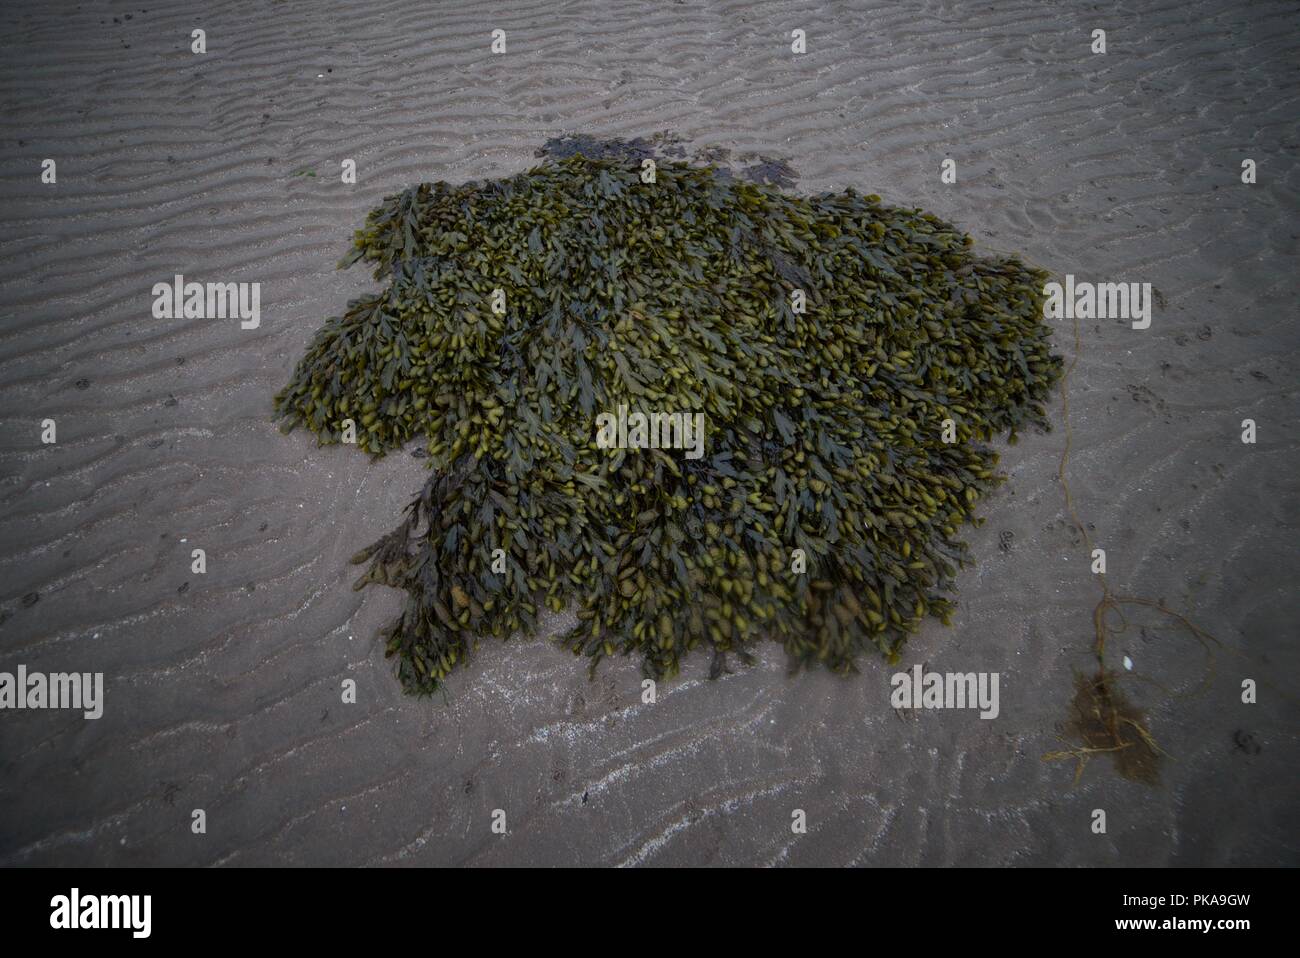 Pile of channelled wrack seaweed on a sandy beach Stock Photo